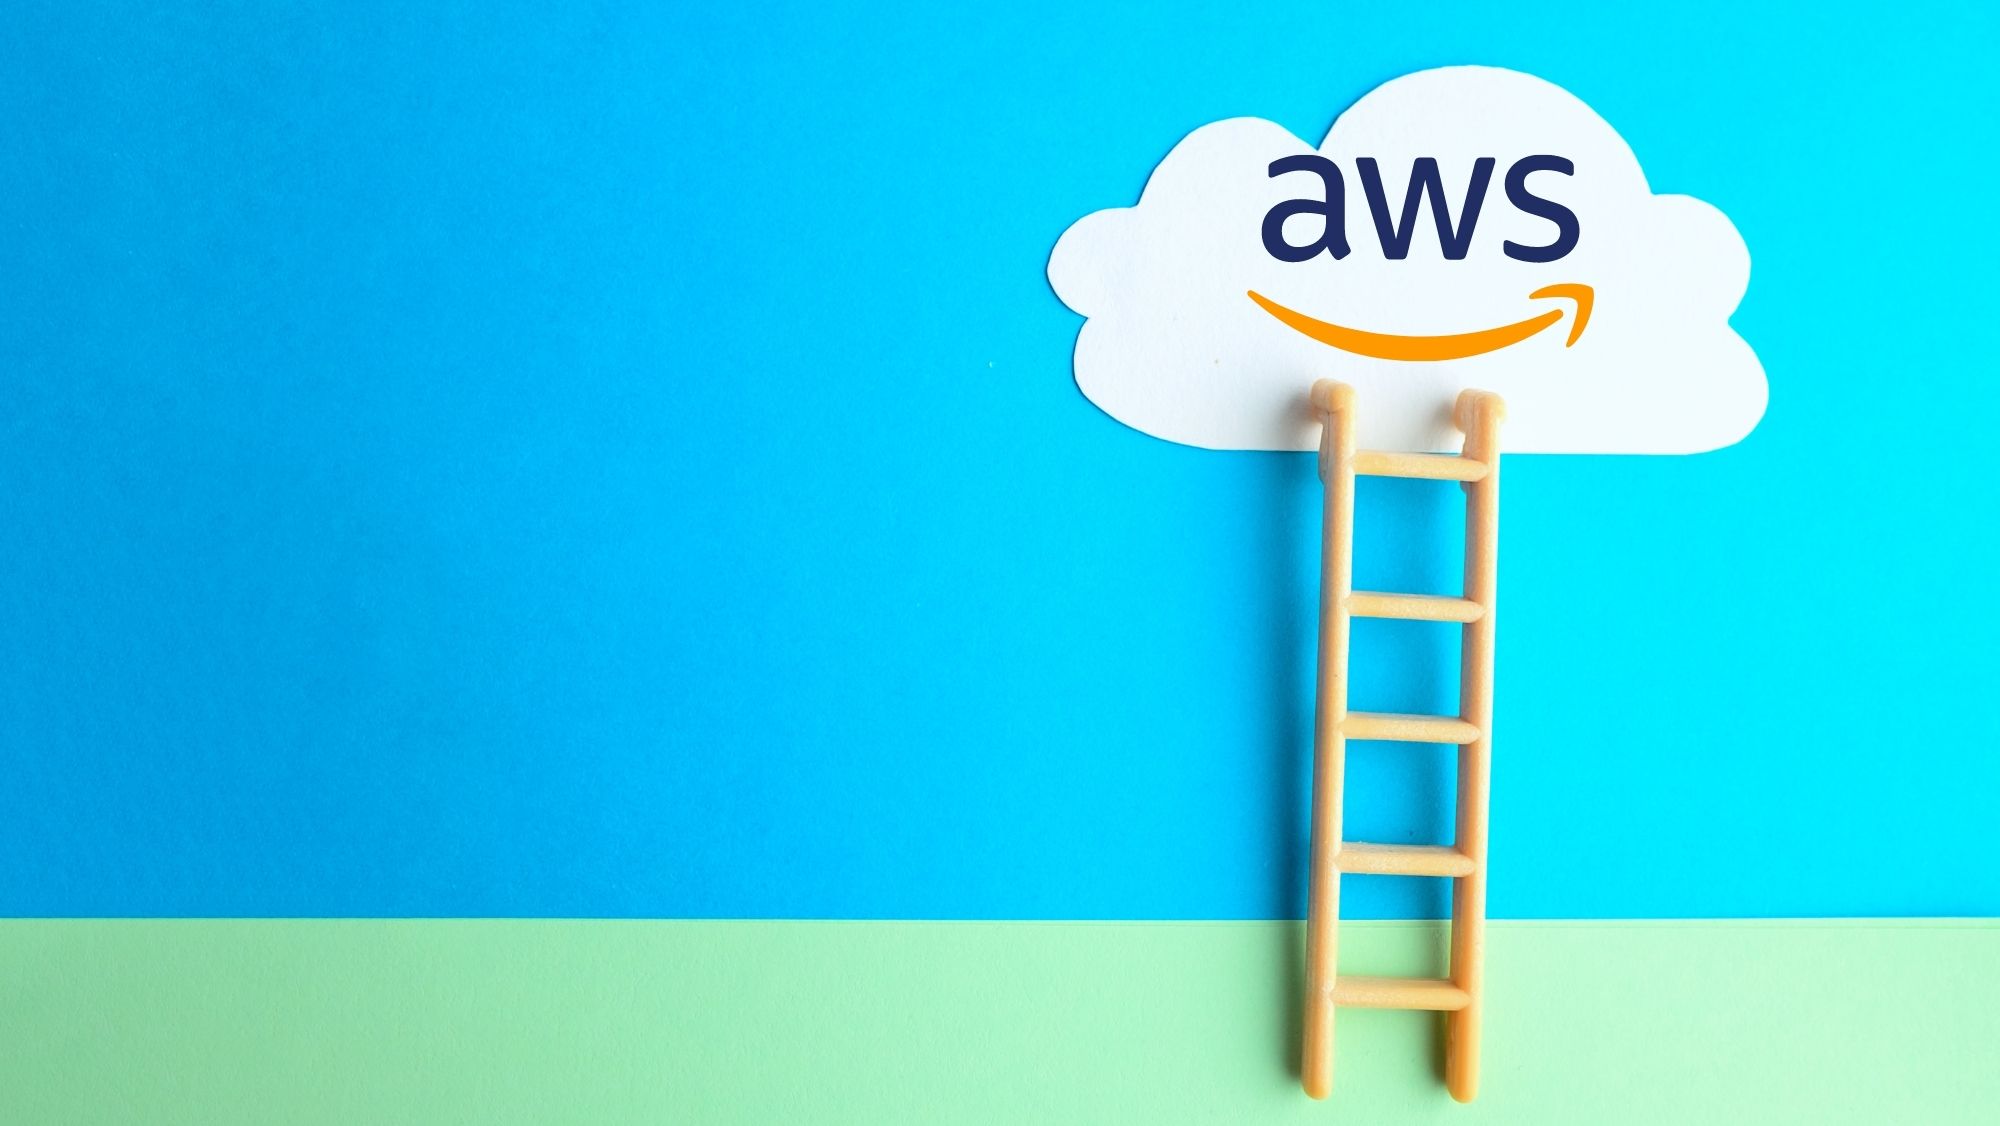 What is the Benefit of AWS ( Amazon Web Services) ?